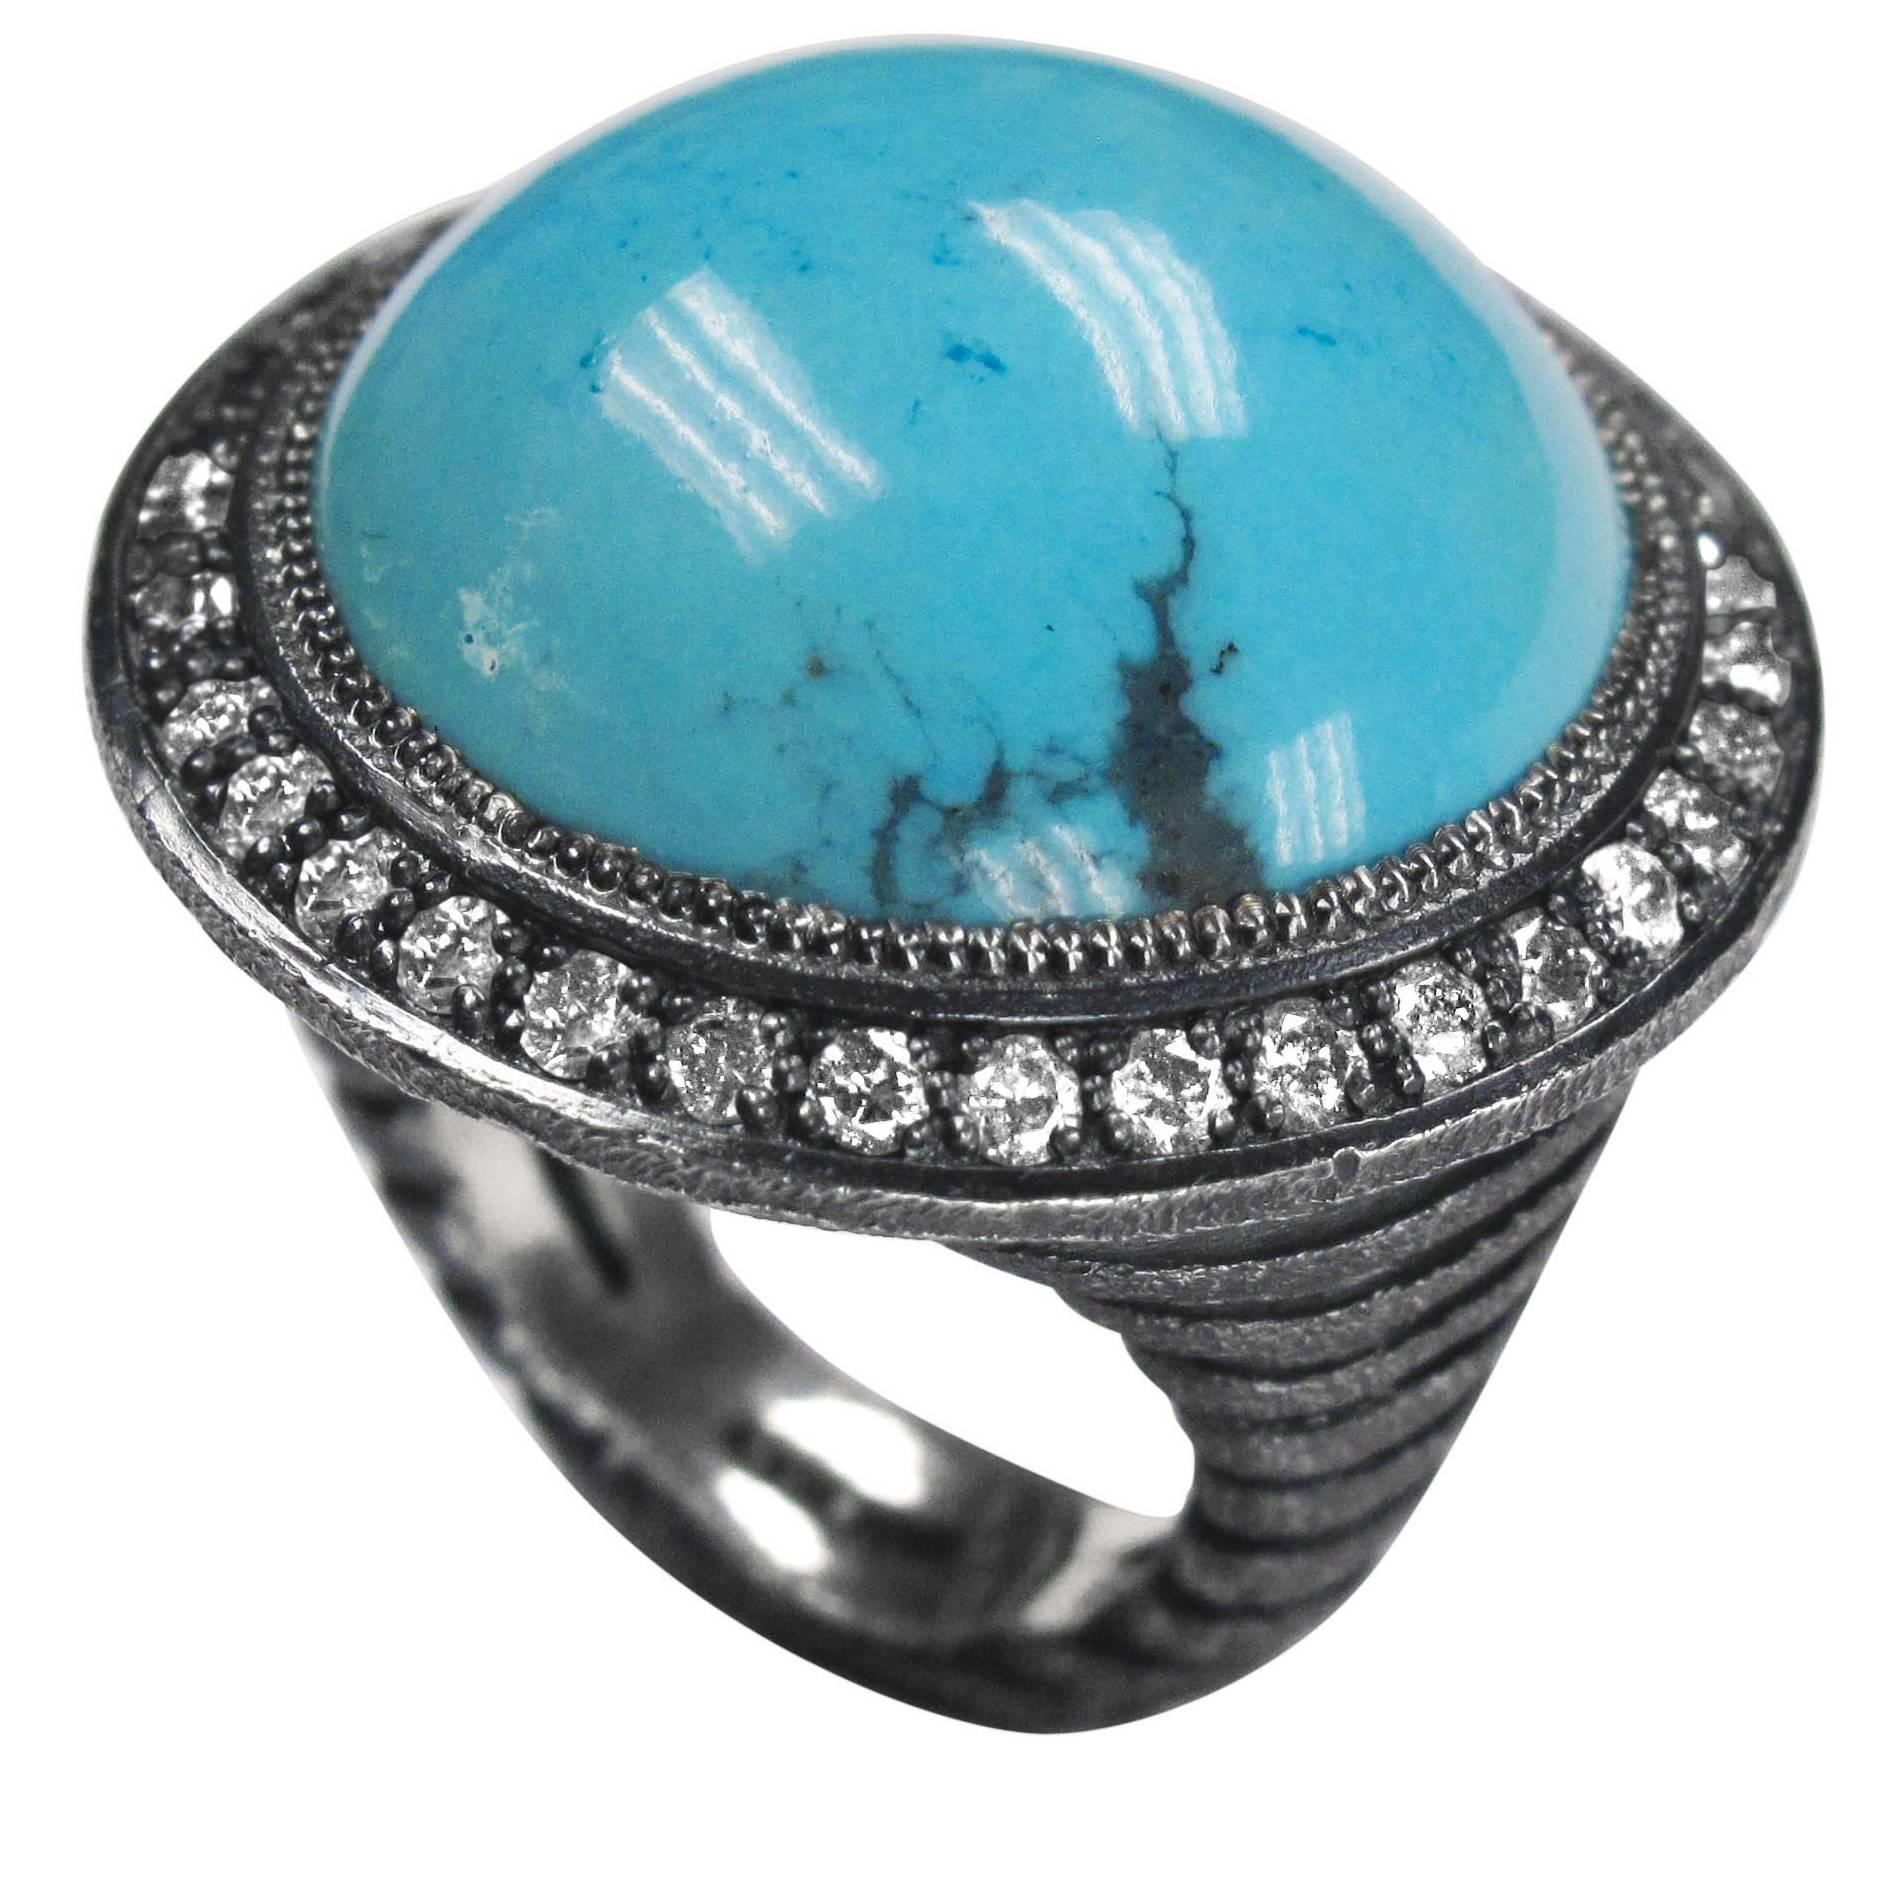 Turquoise Cabochon Diamond Oxidized Sterling Silver Textured Ring One of a Kind